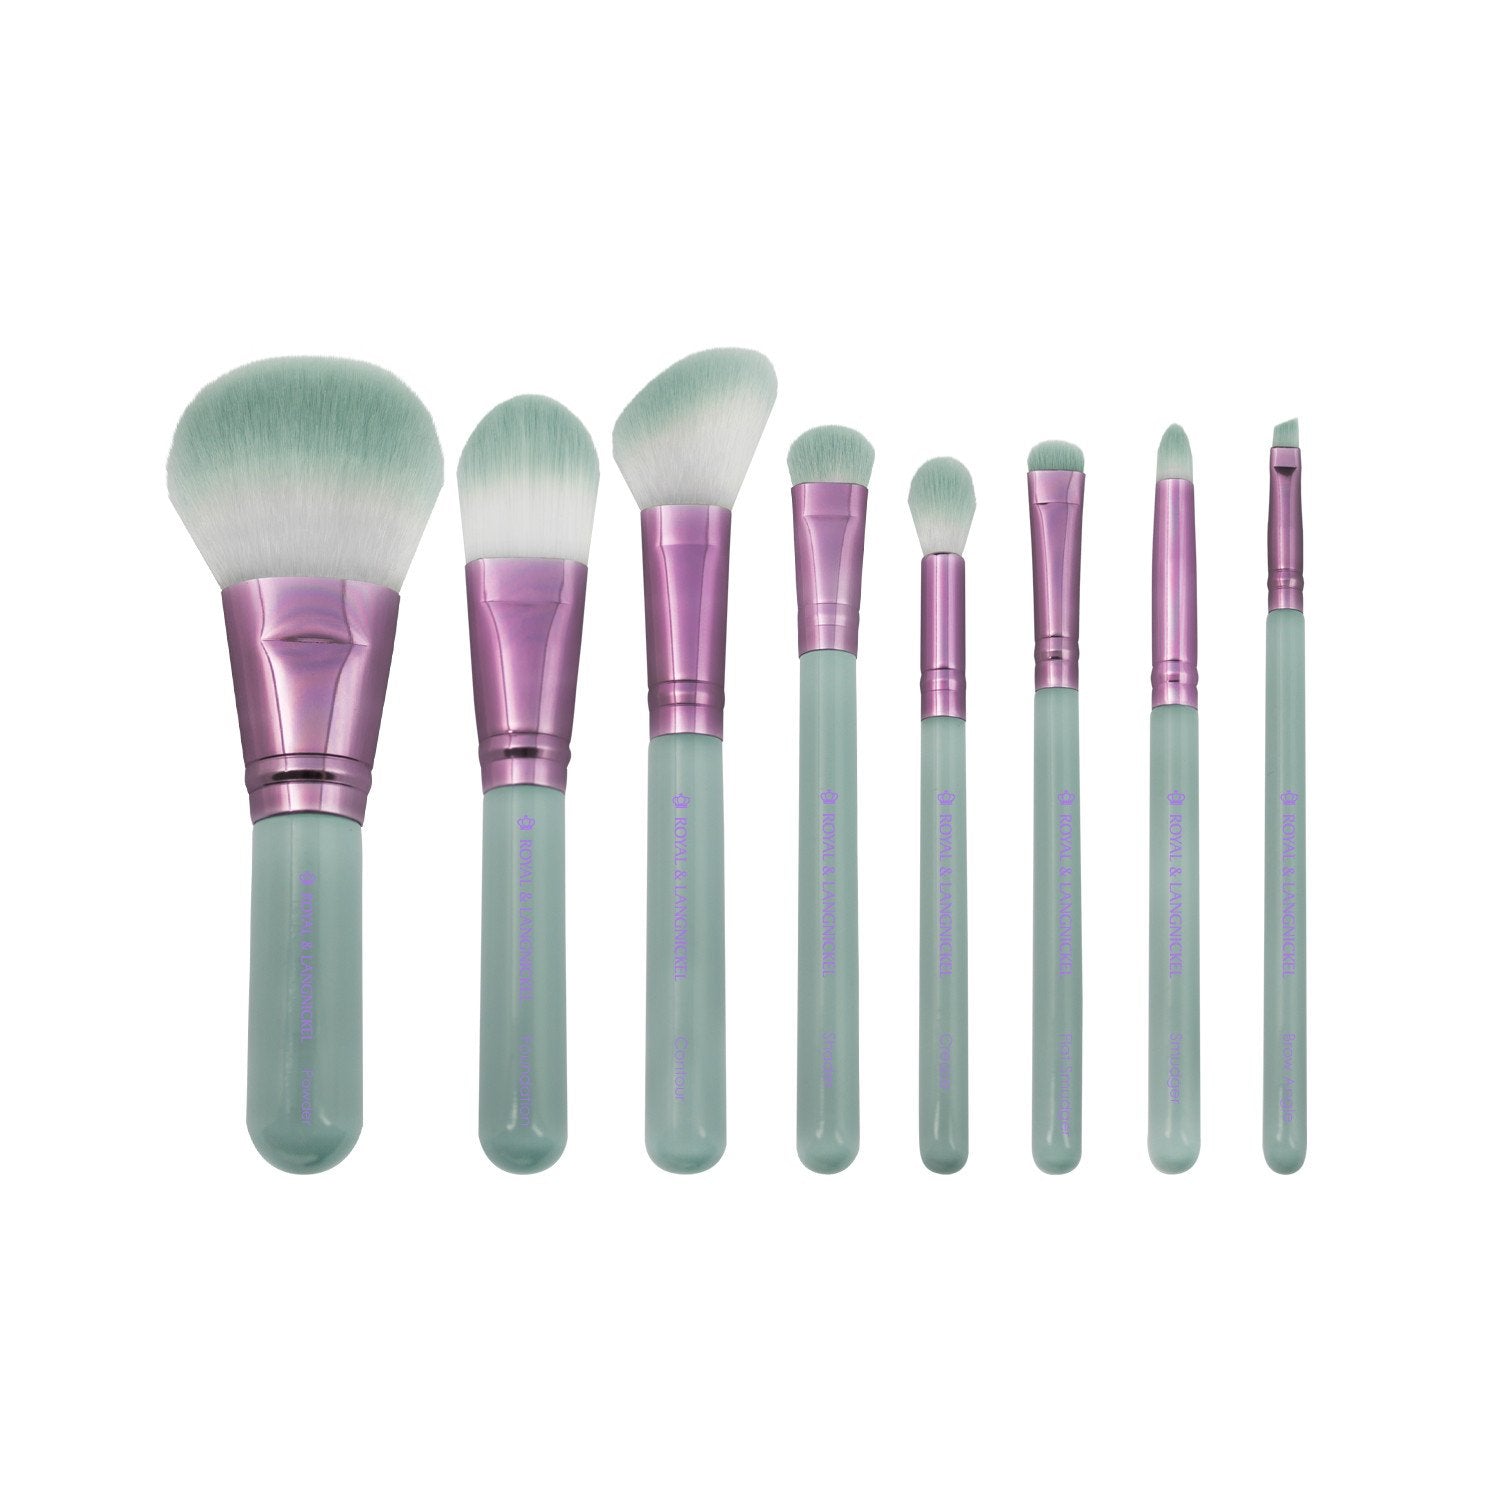 Royal & Langnickel - Love Is... Patience 9pc Travel Kit